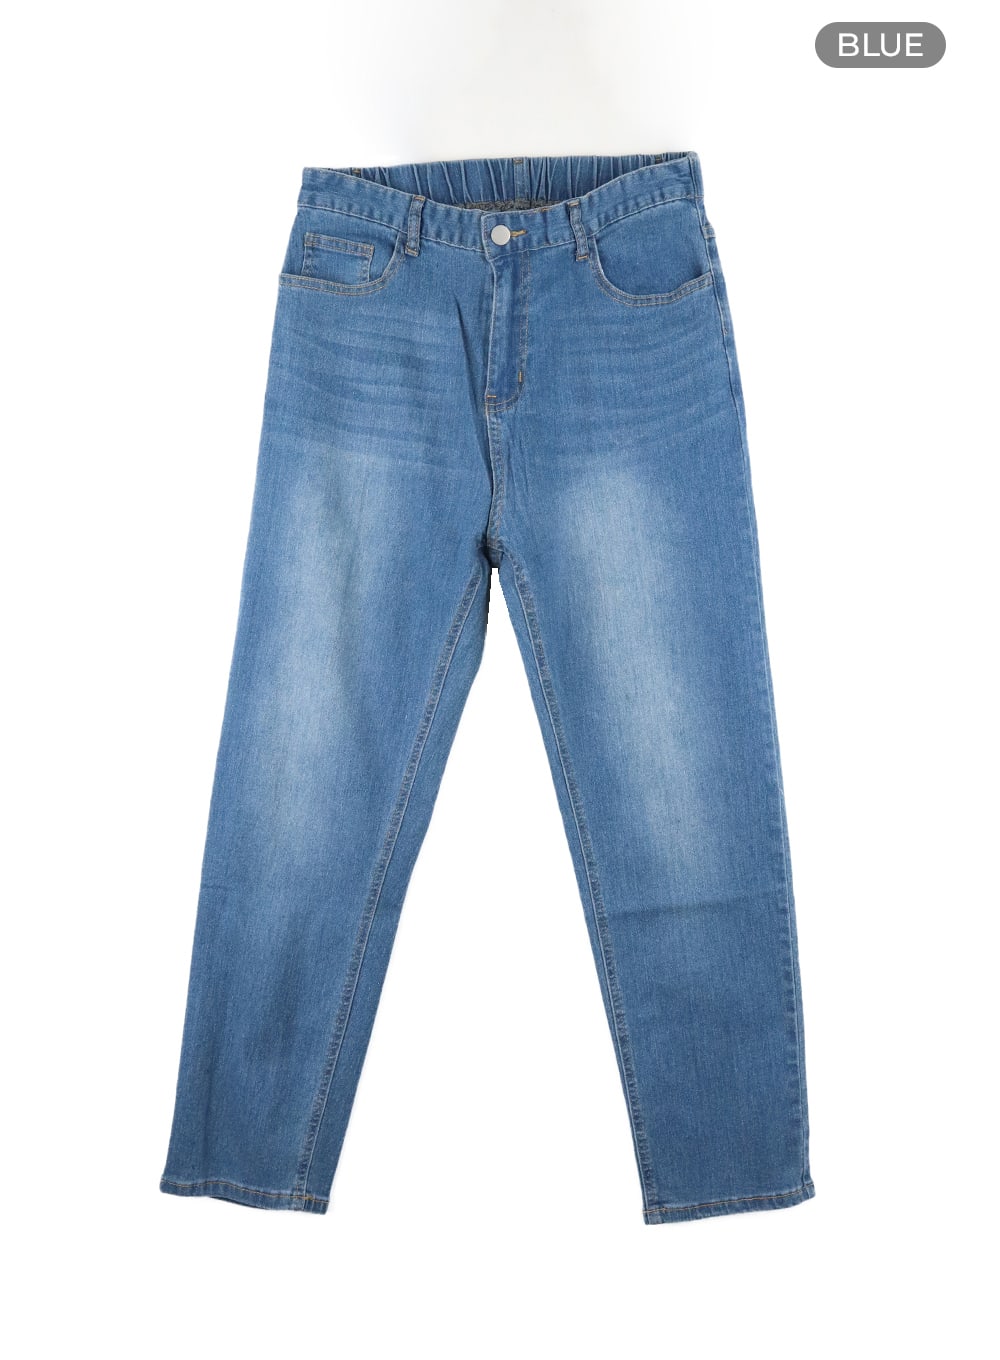 mens-cropped-slim-fit-jeans-ia402 / Blue